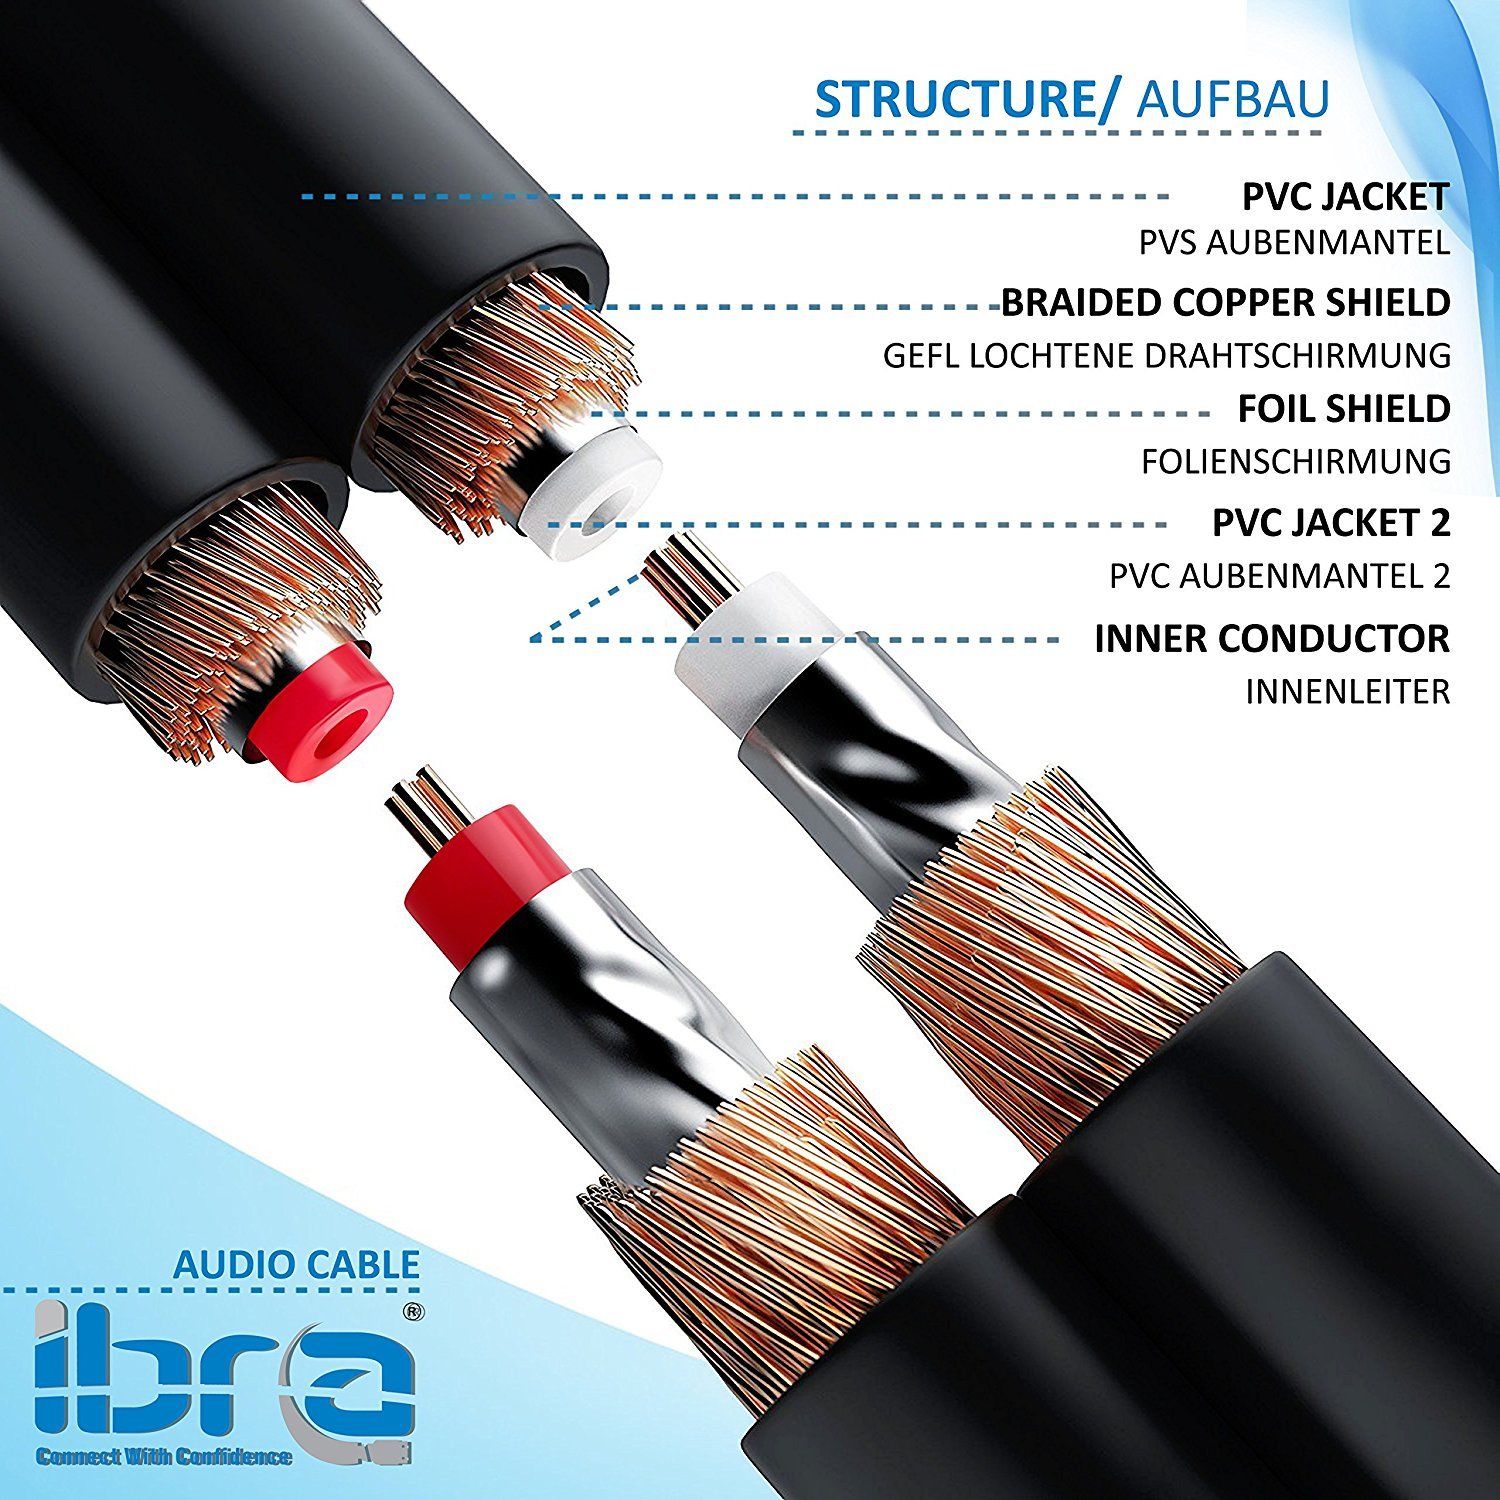 IBRA 3M 2RCA Male to 2RCA Male High Quality Home Theater Audio Cable -2RCA TO 2RCA Cable - Gun Metal Range